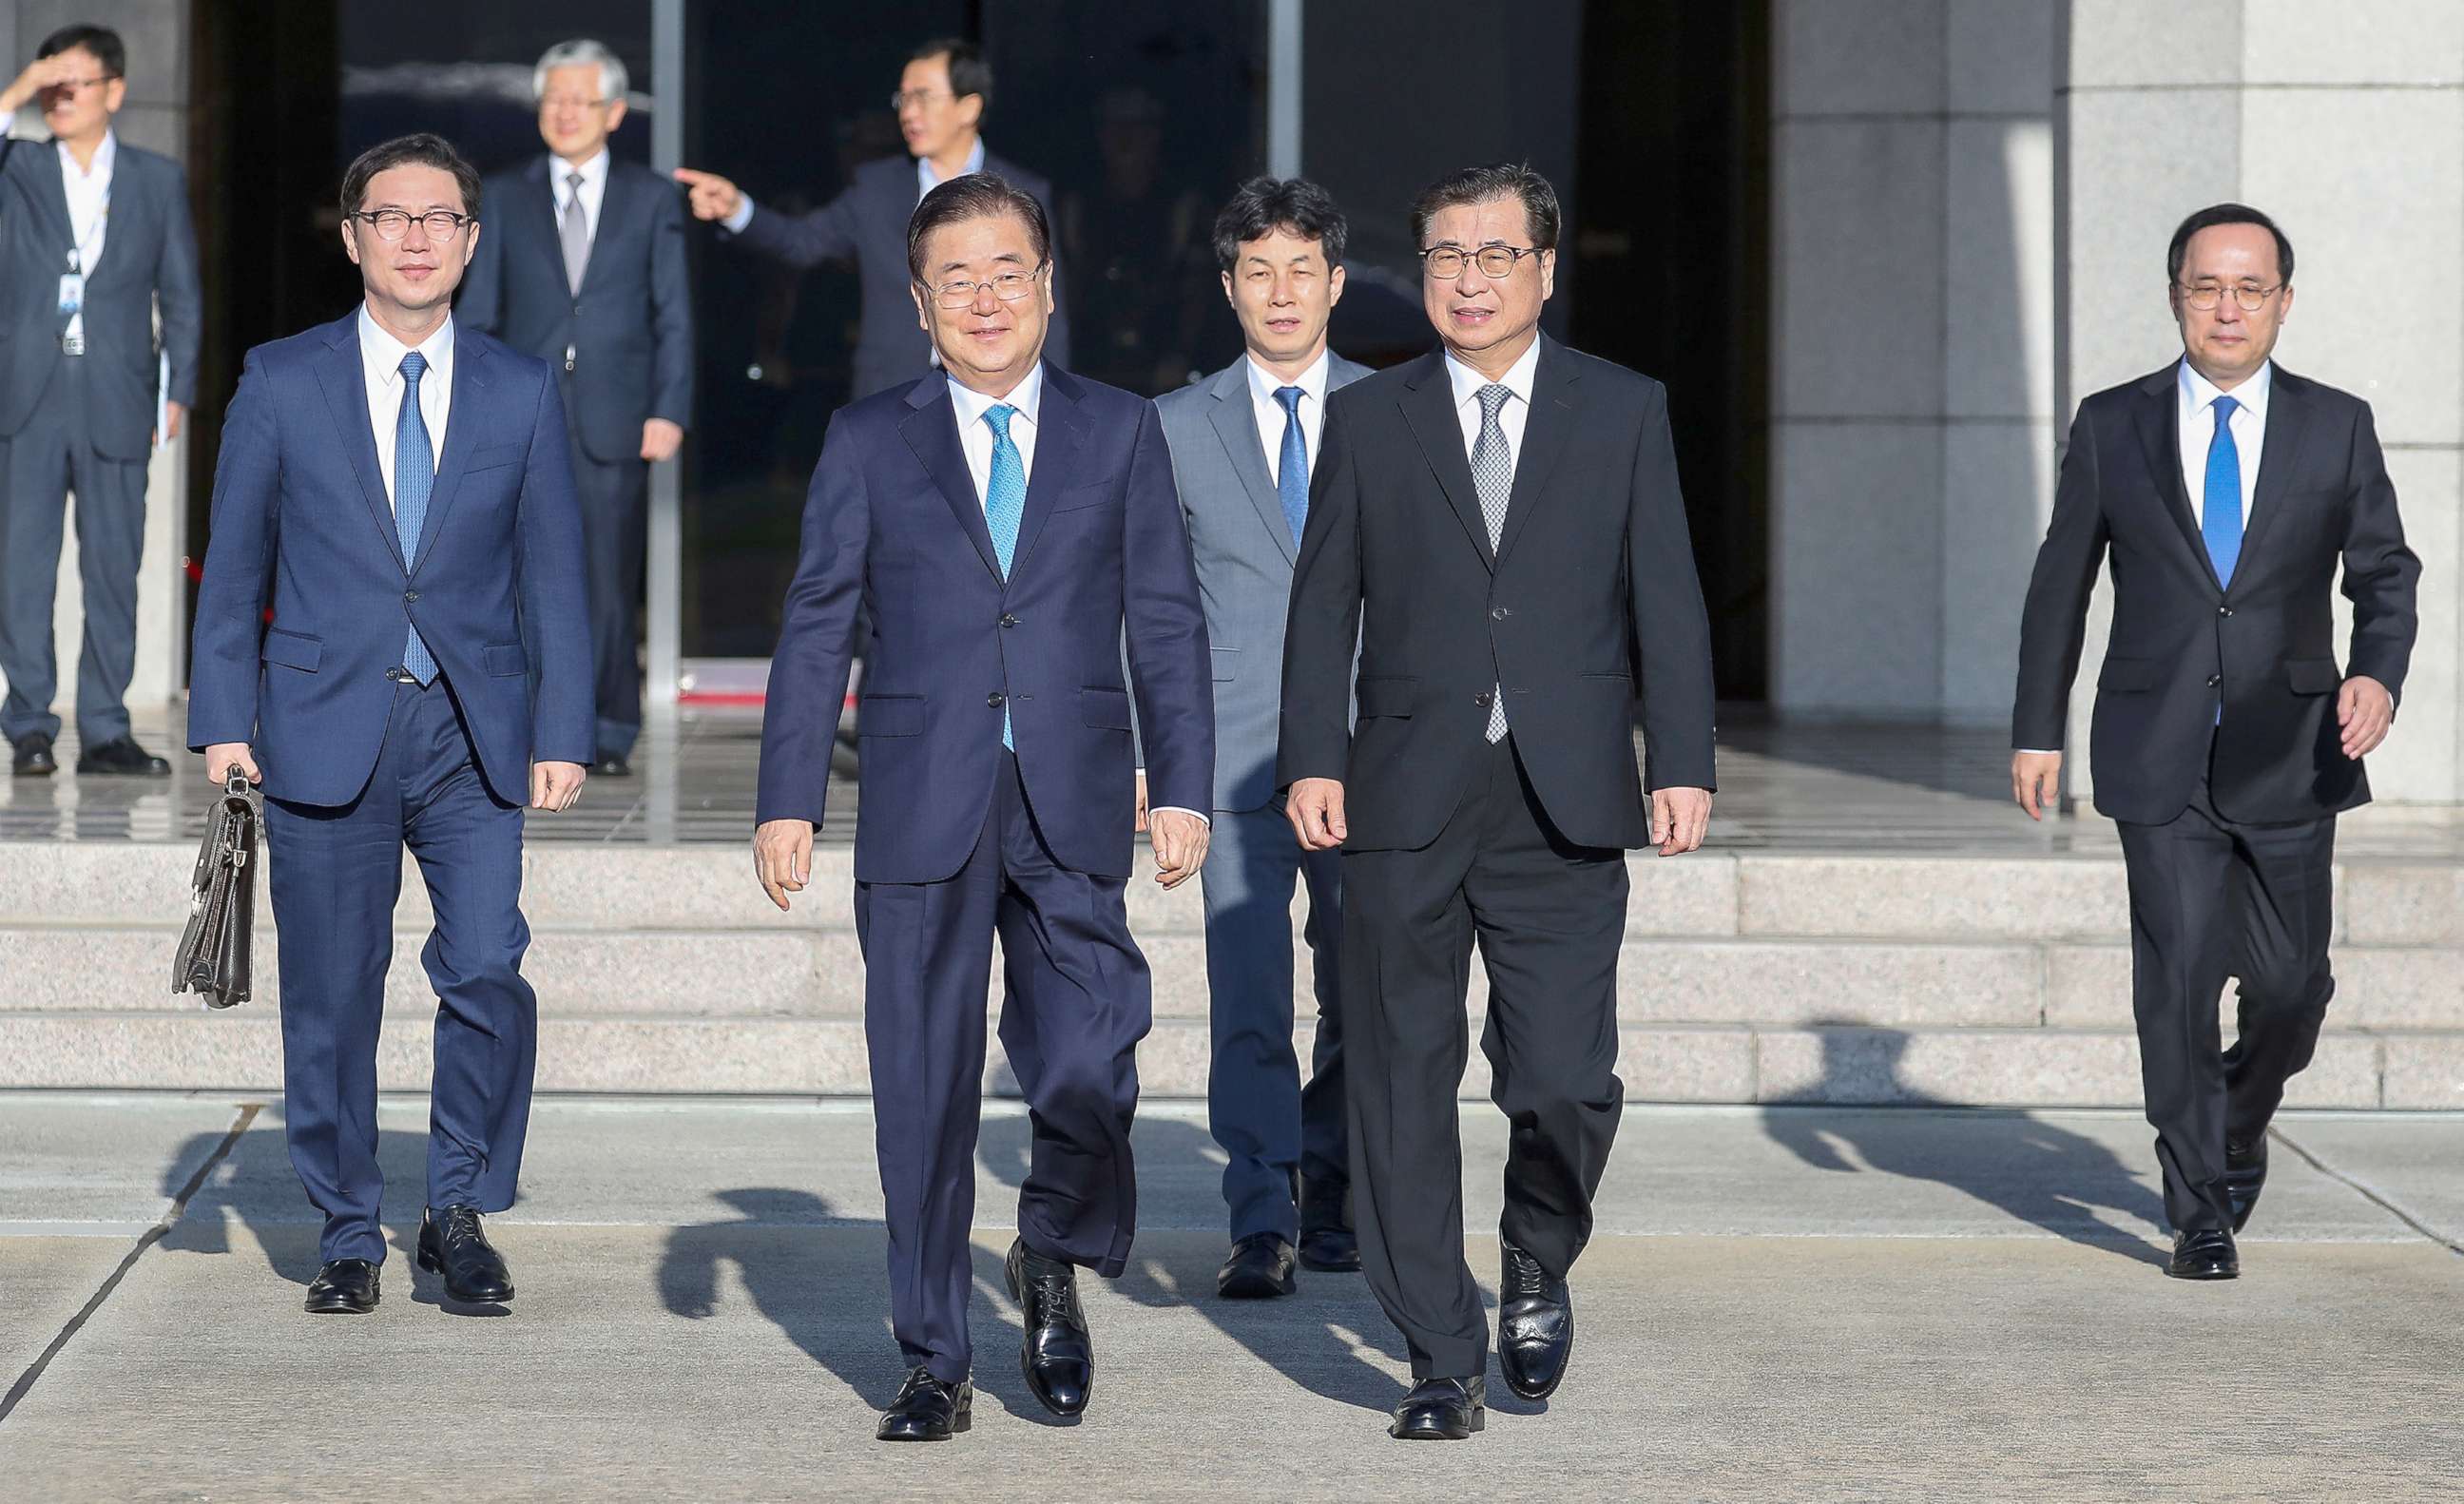 PHOTO: South Korean special envoys led by the chief of the national security office at Seoul'?s presidential Blue House, Chung Eui-yong, leave for Pyongyang from an airport in Sungnam city, South Korea, Sept. 5, 2018.